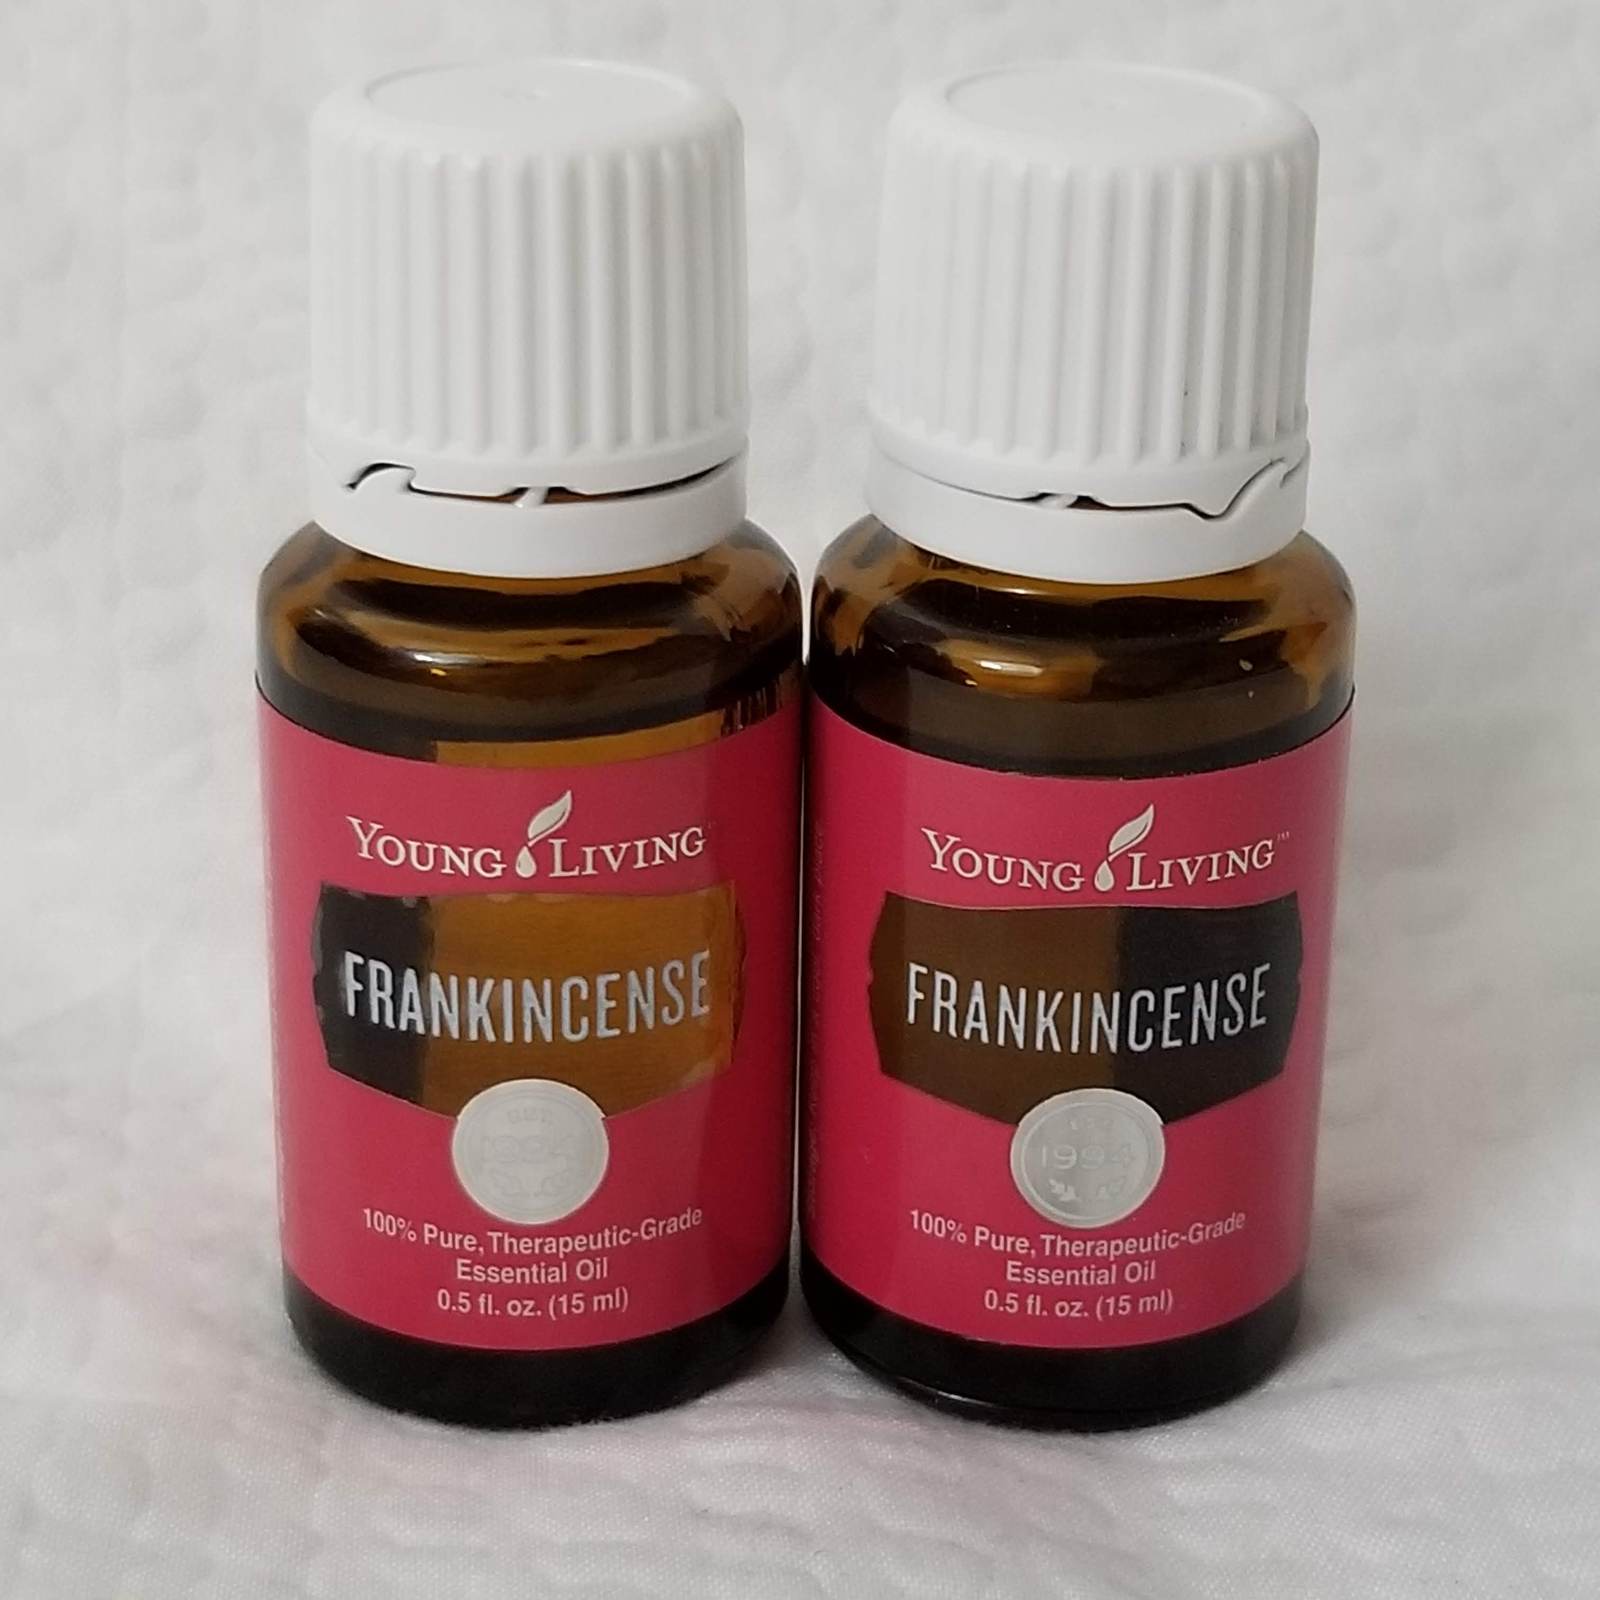 Young Living Frankincense 15mL x2 Essential Oil Lot Authentic USA YL YLEO Frank - $110.00